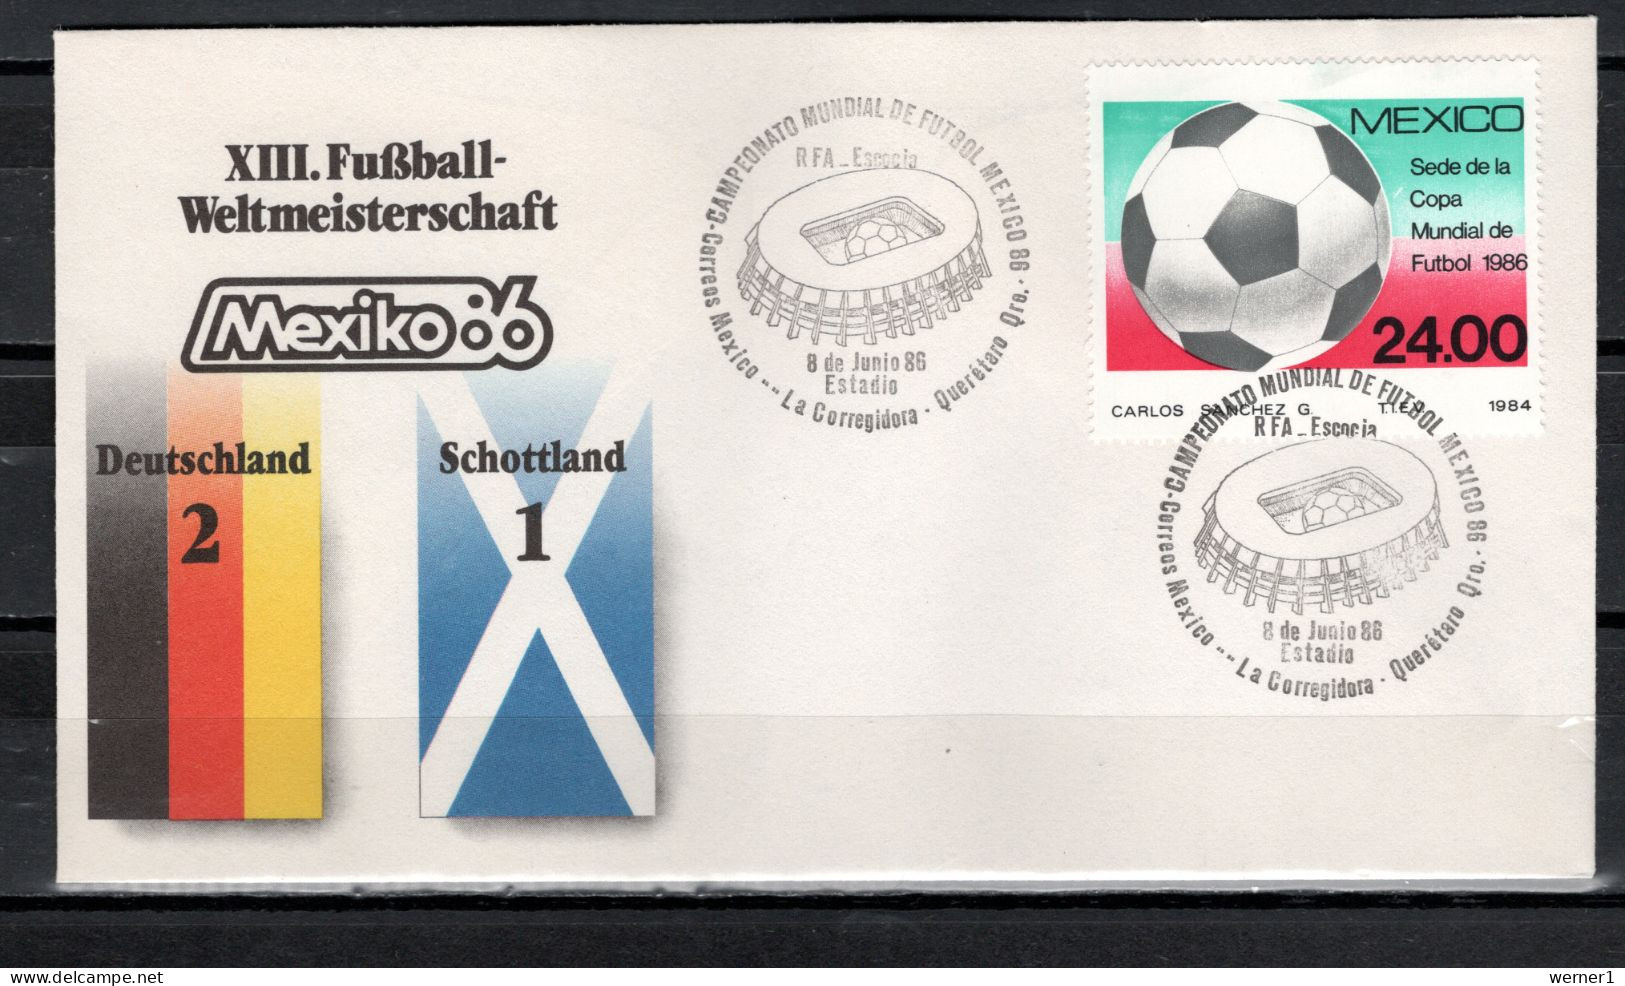 Mexico 1986 Football Soccer World Cup Commemorative Cover Match Germany - Scotland 2 : 1 - 1986 – Messico